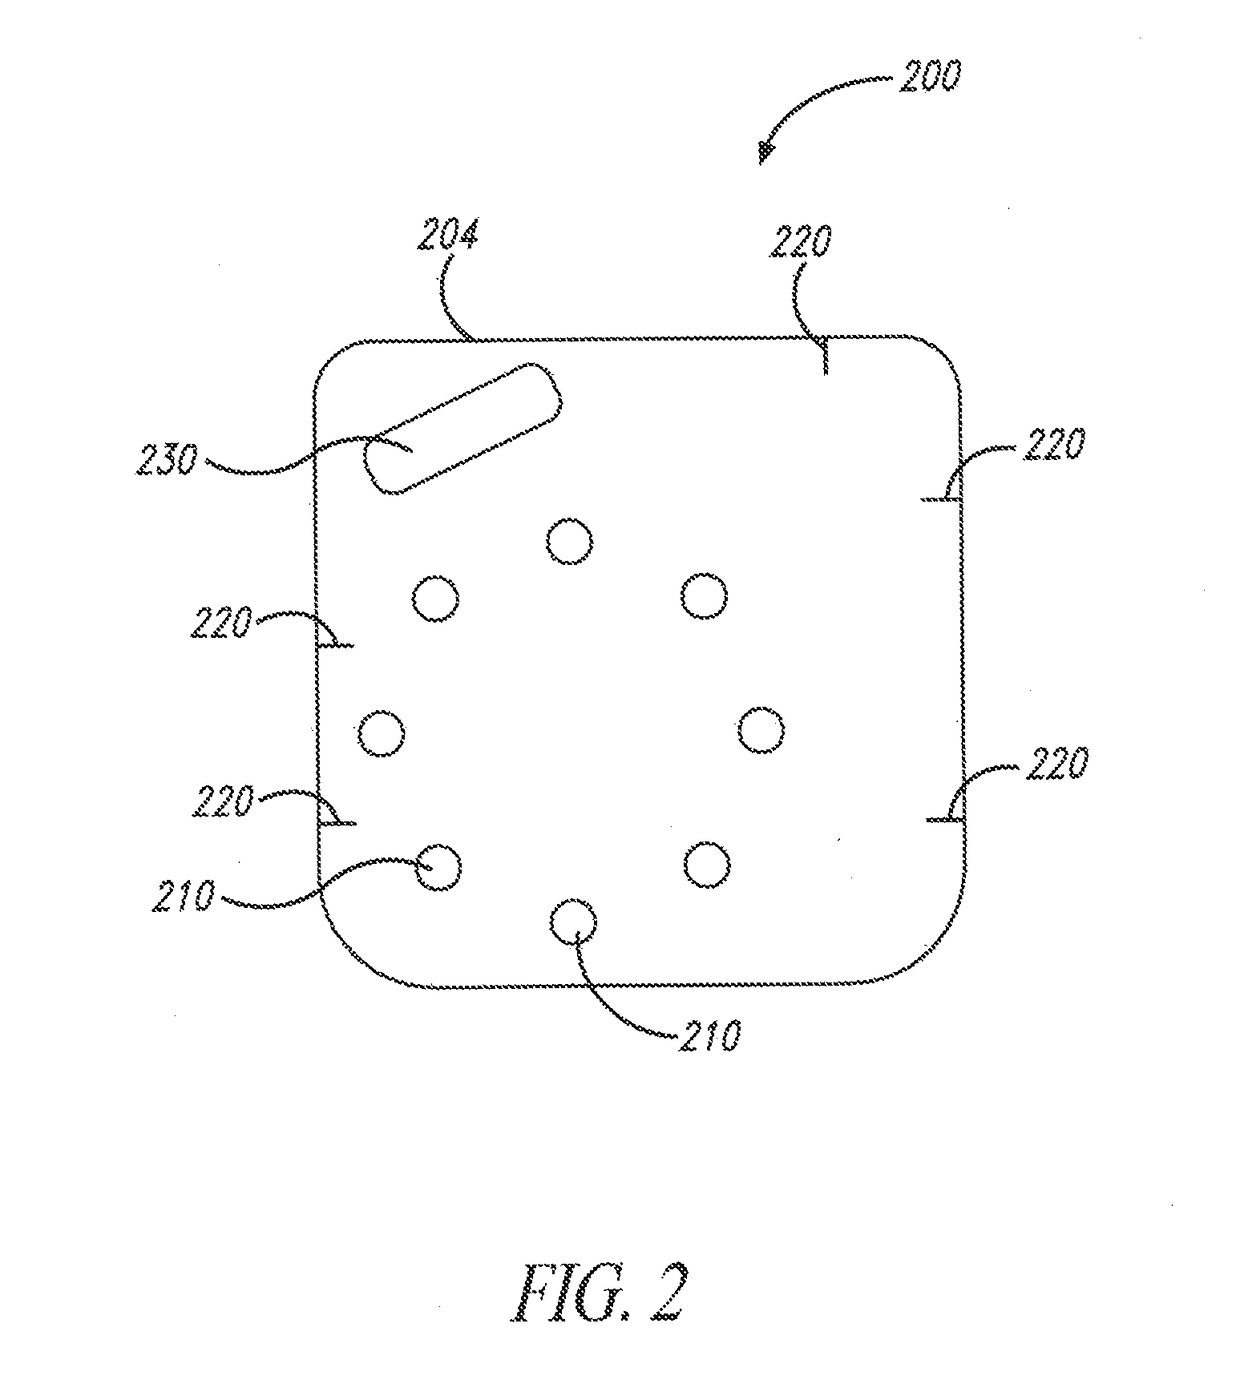 Suture carrier devices, systems and methods of using same